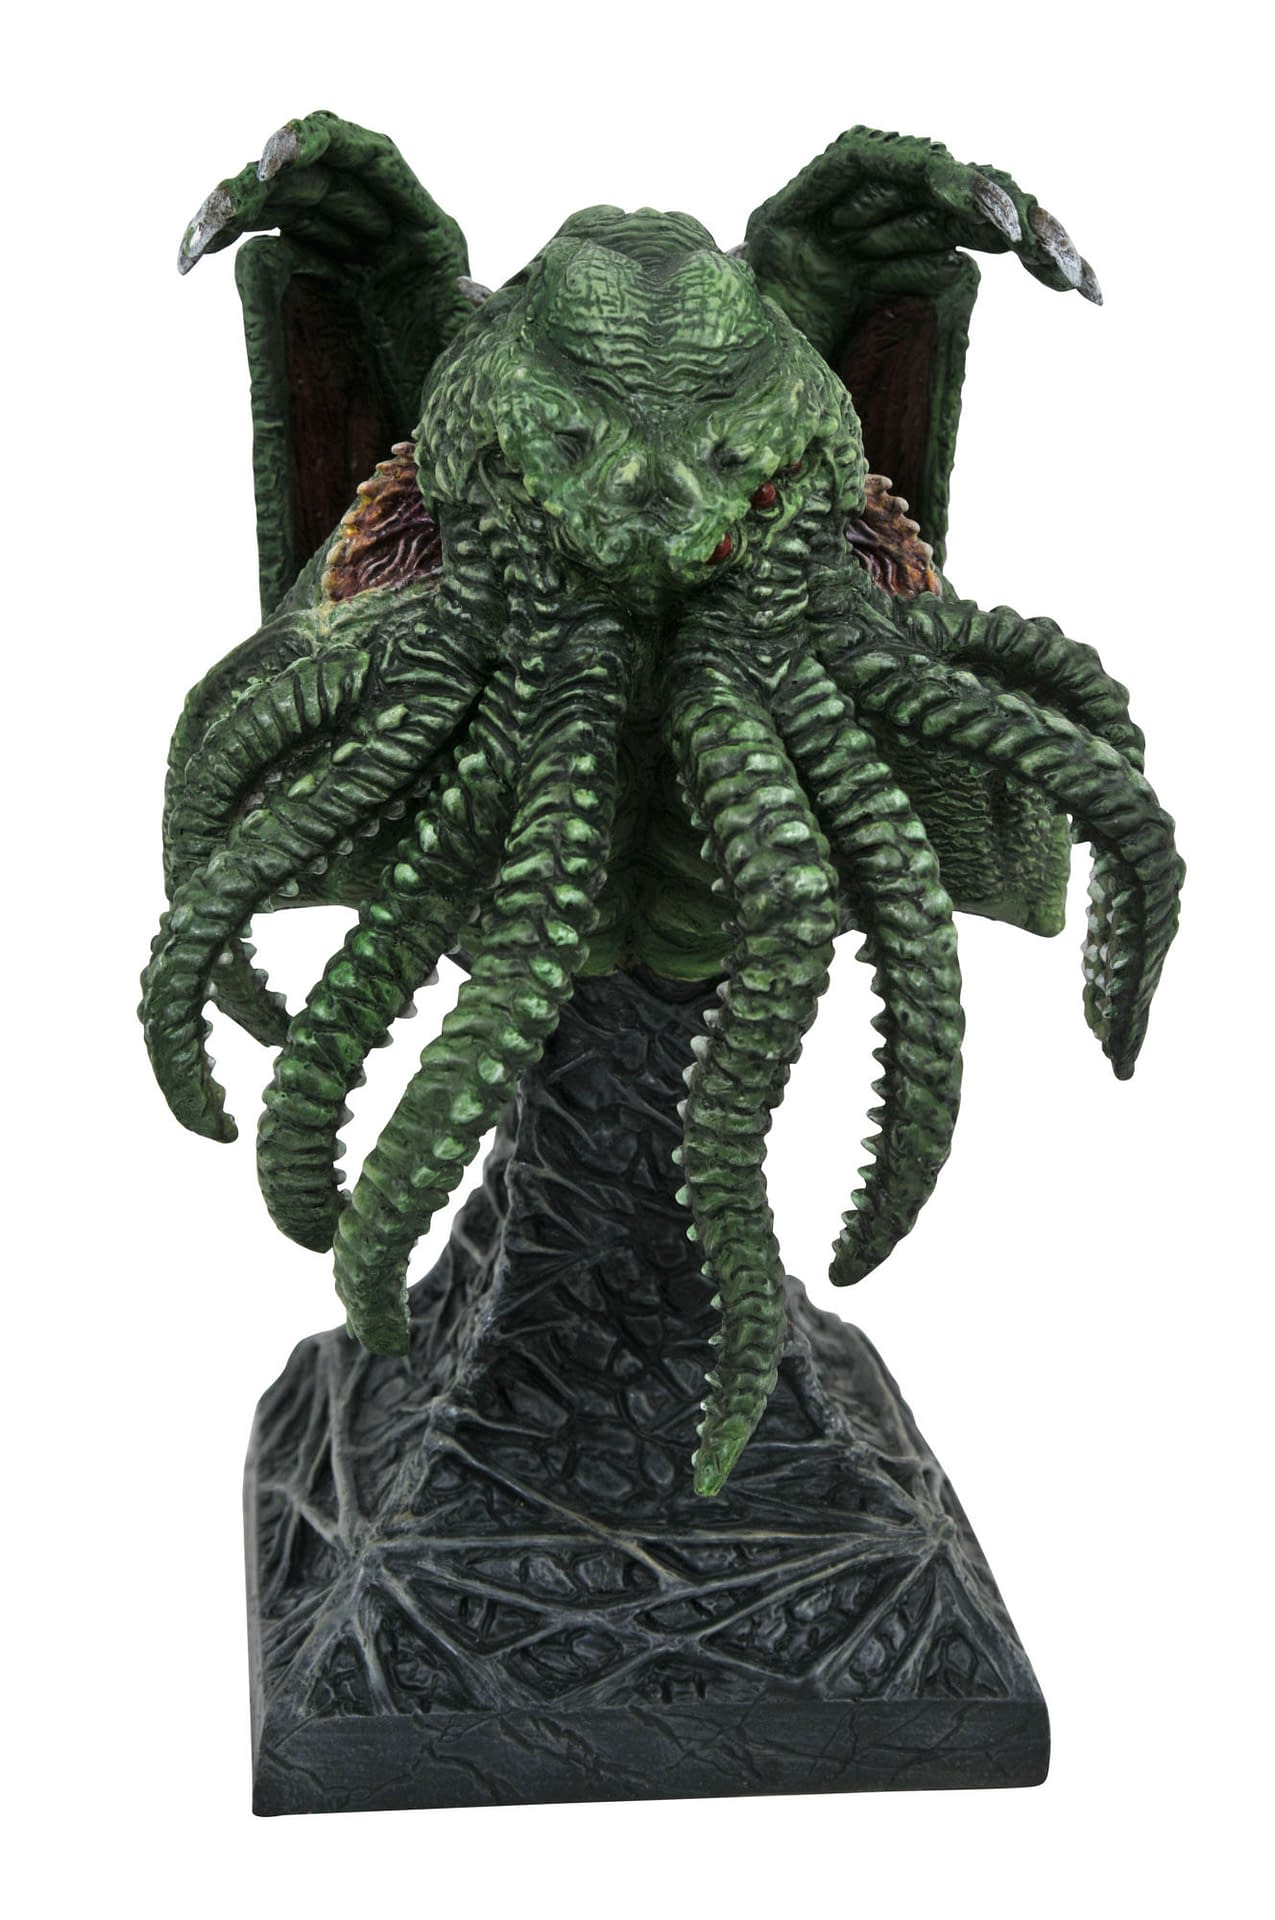 Cthulhu and Pennywise Come From the Depths with Diamond Gallery